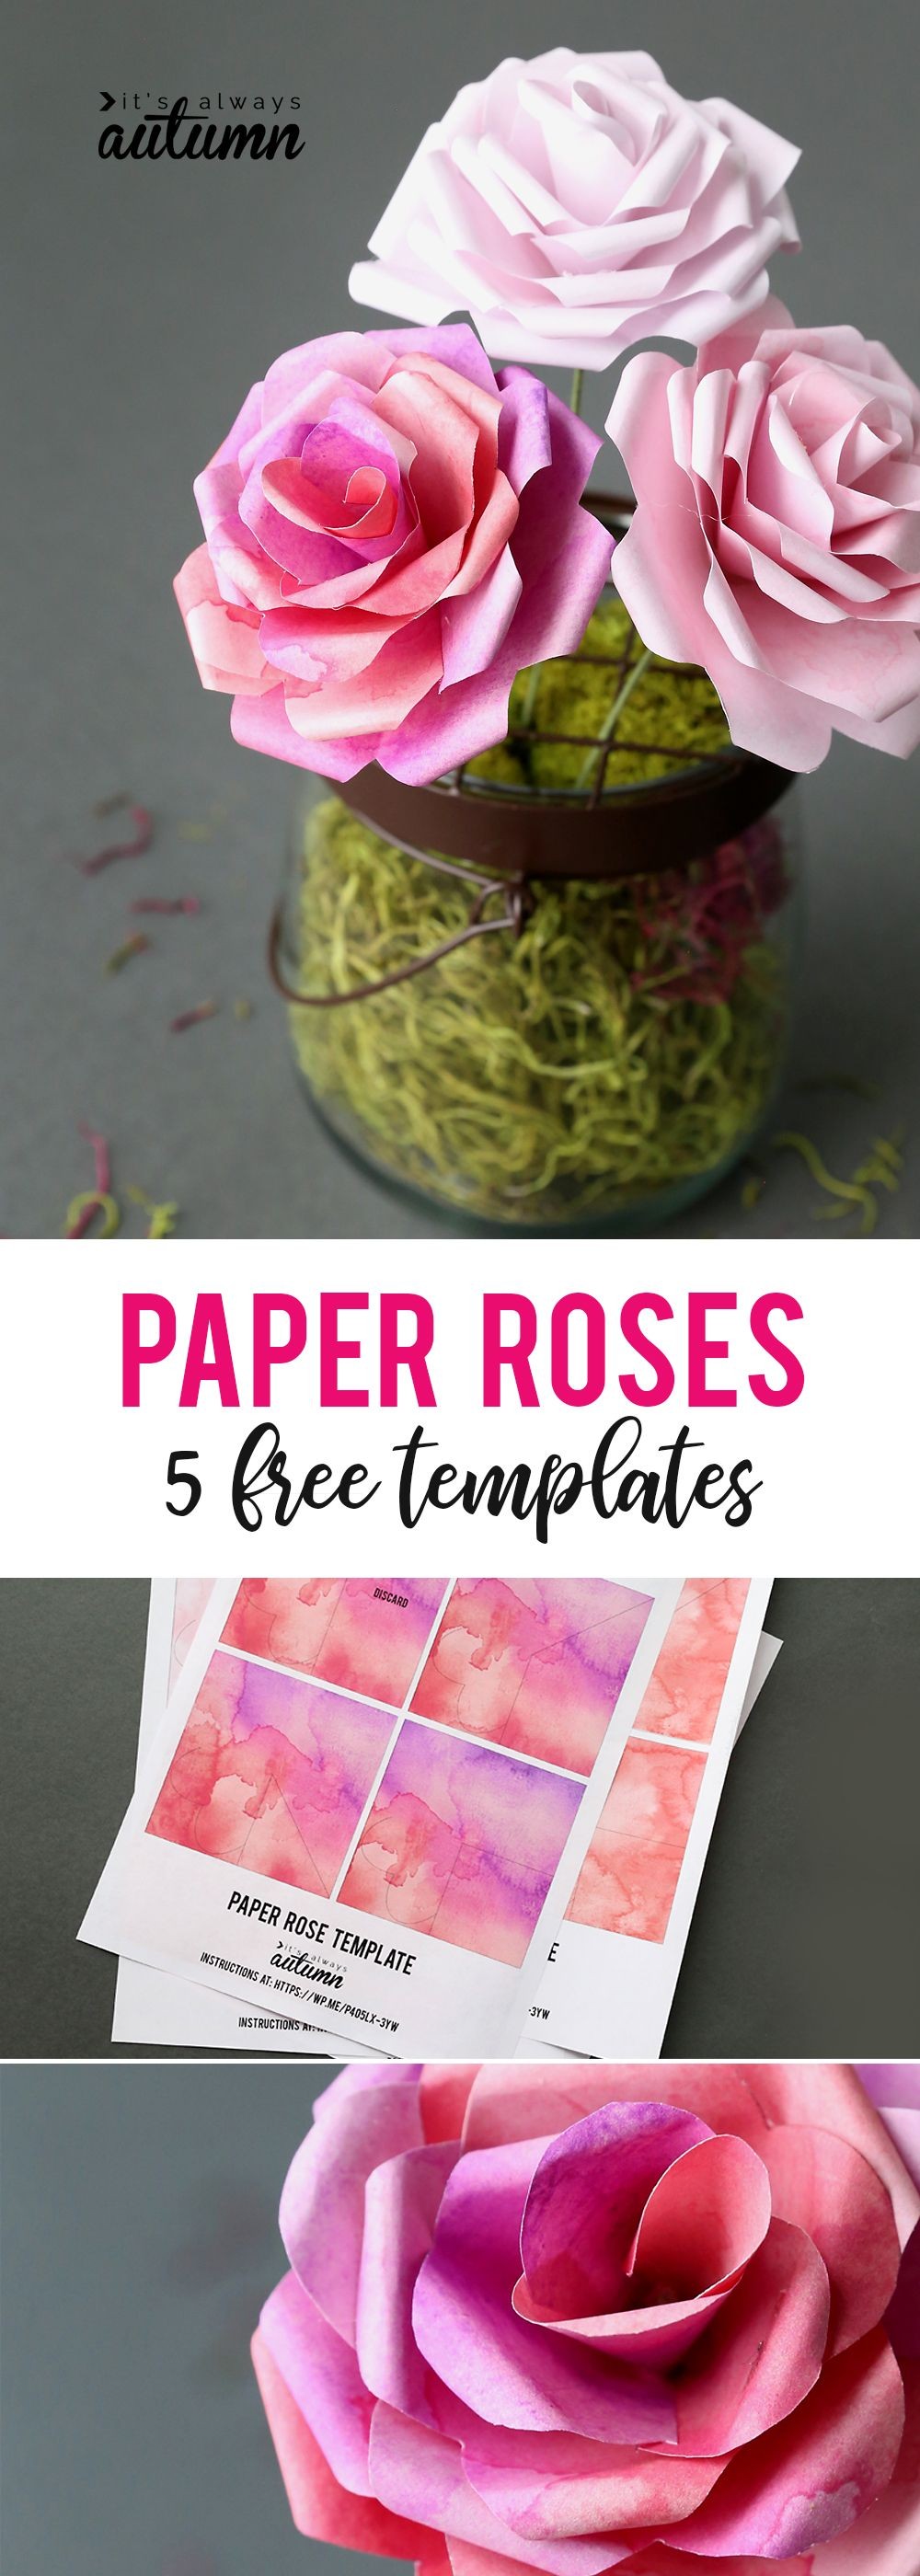 Papercraft Rose Make Gorgeous Paper Roses with This Free Paper Rose Template